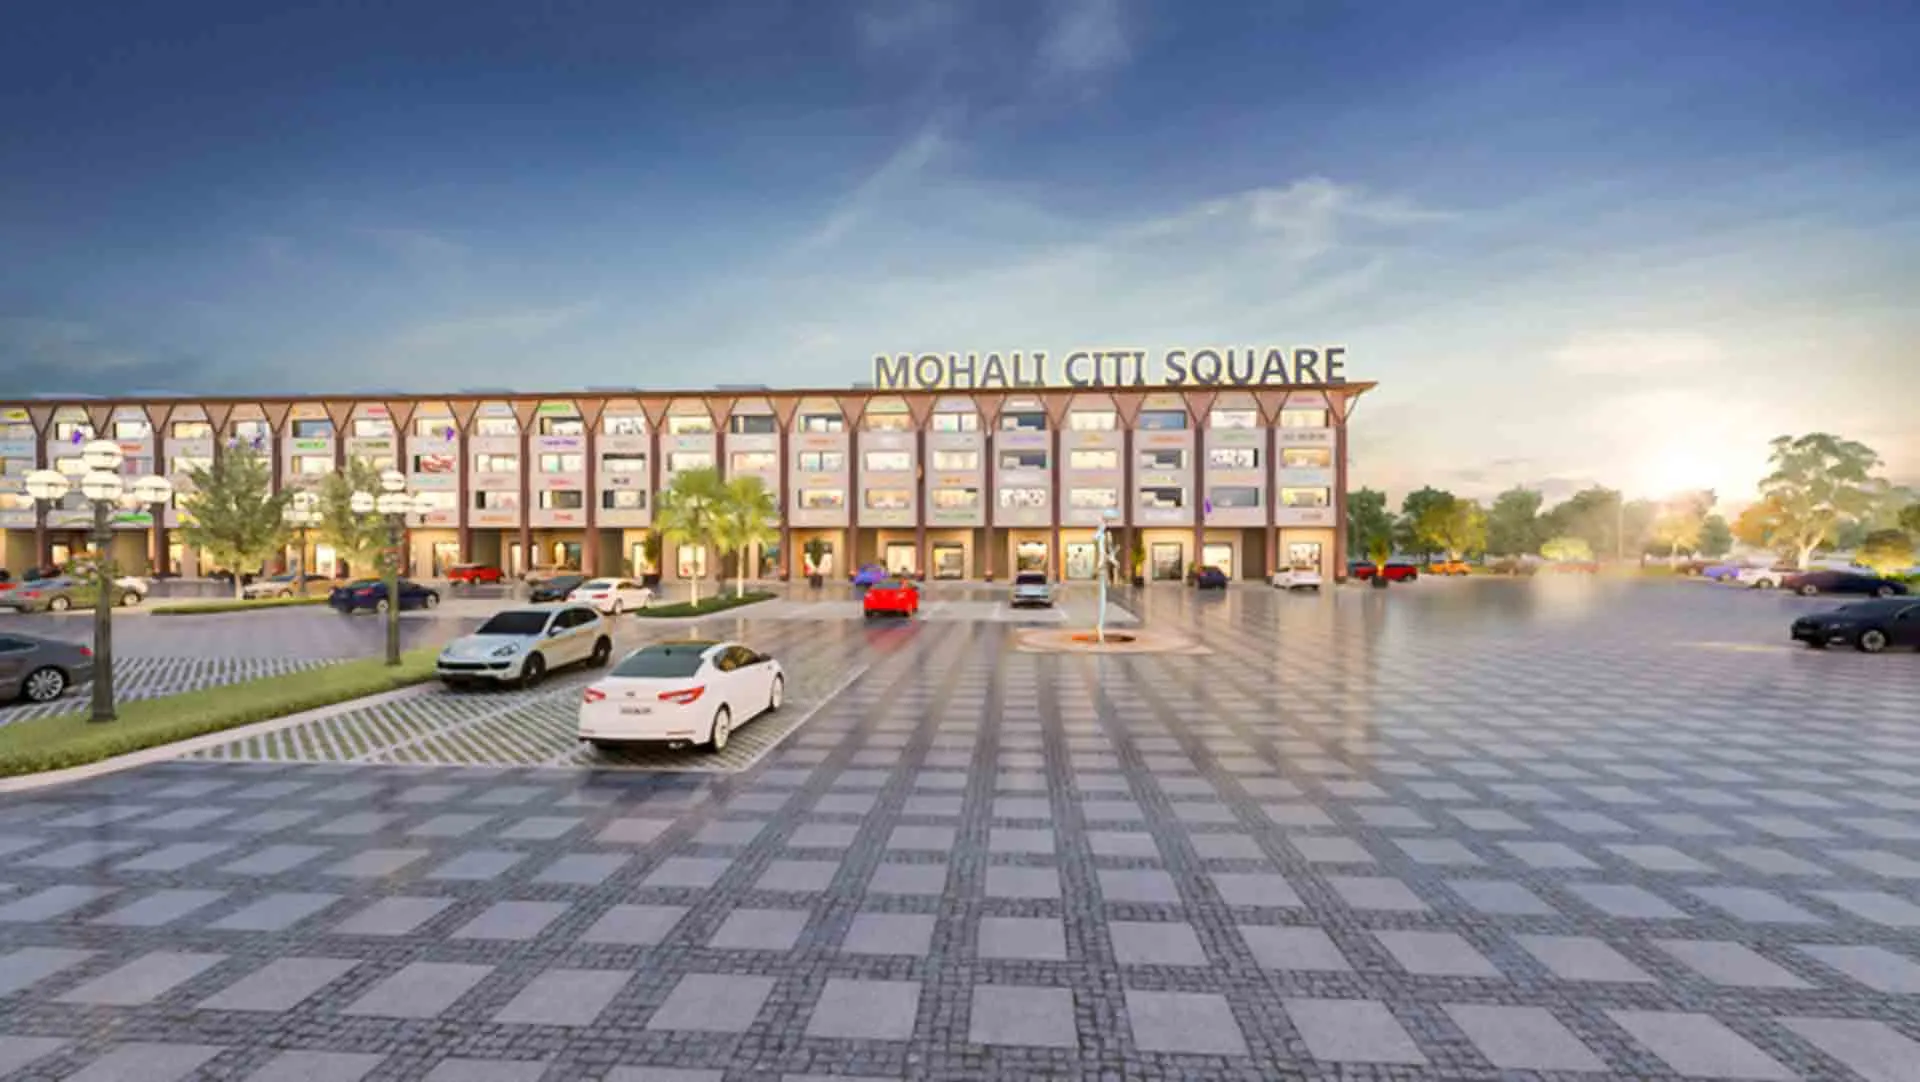 STJ Mohali Citi Square Aerocity Commercial Property - New Project Image 3